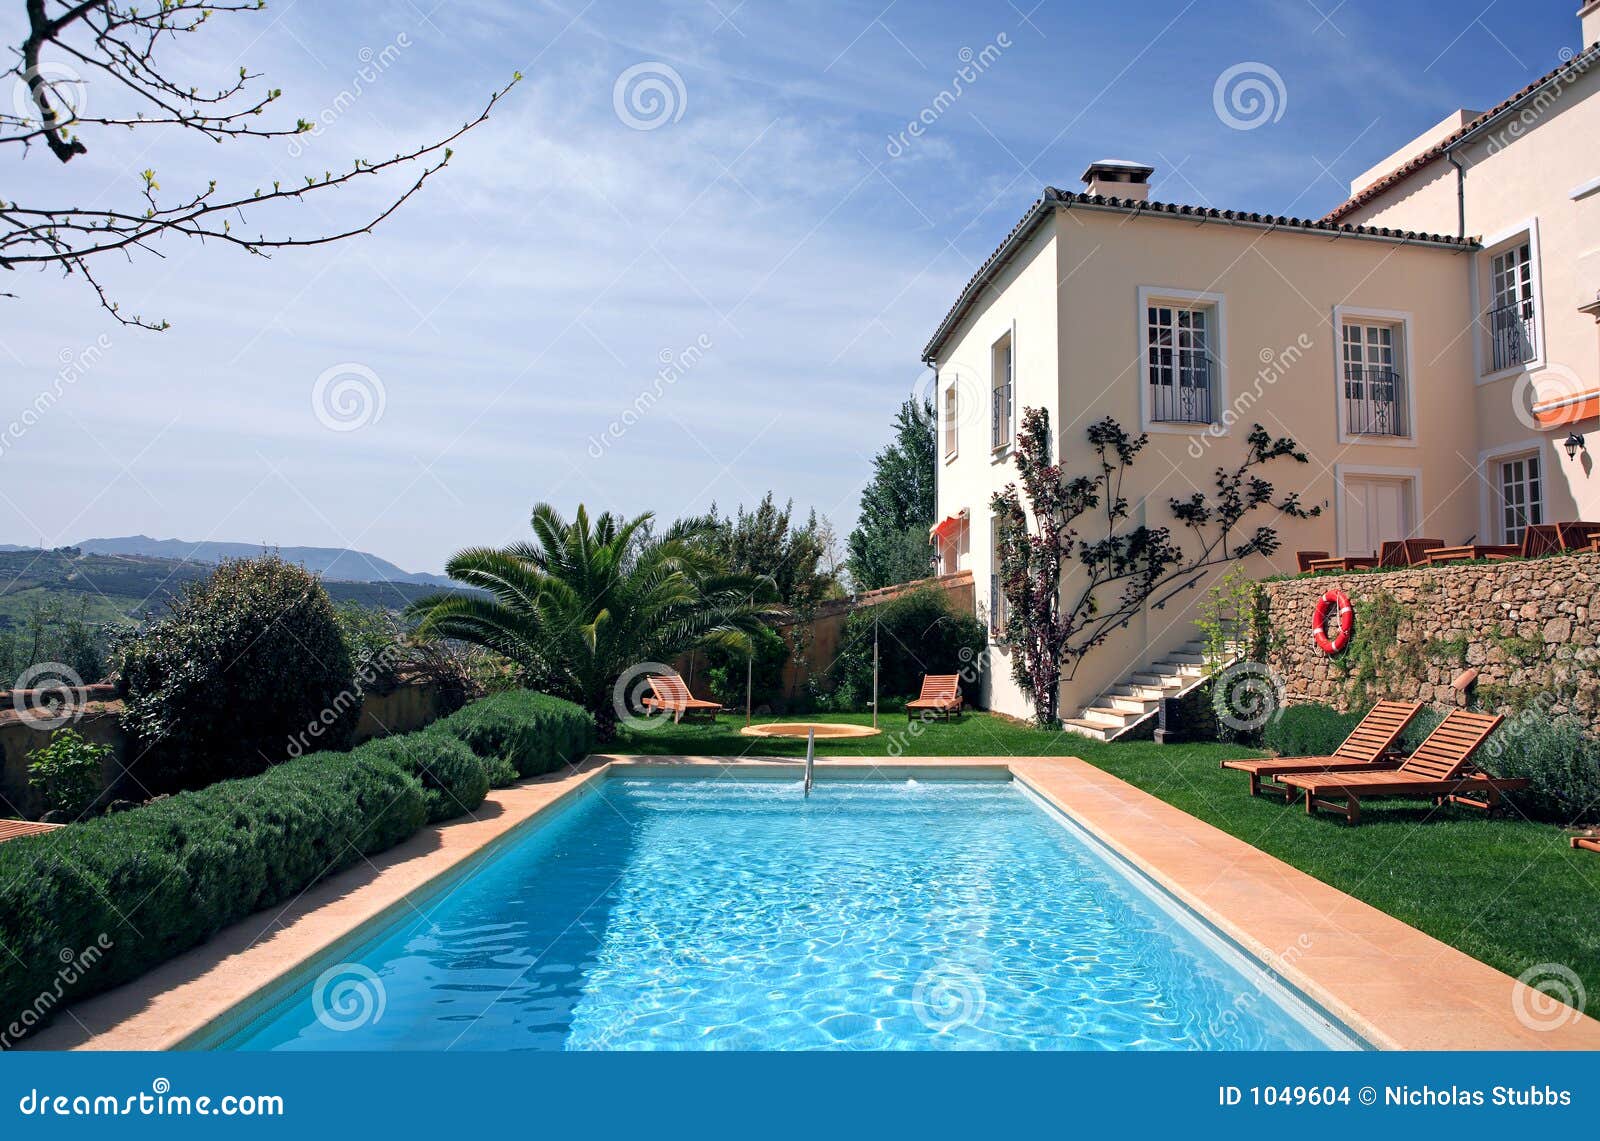 Luxury Rustic Hotel And Swimming Pool Stock Images - Image: 1049604